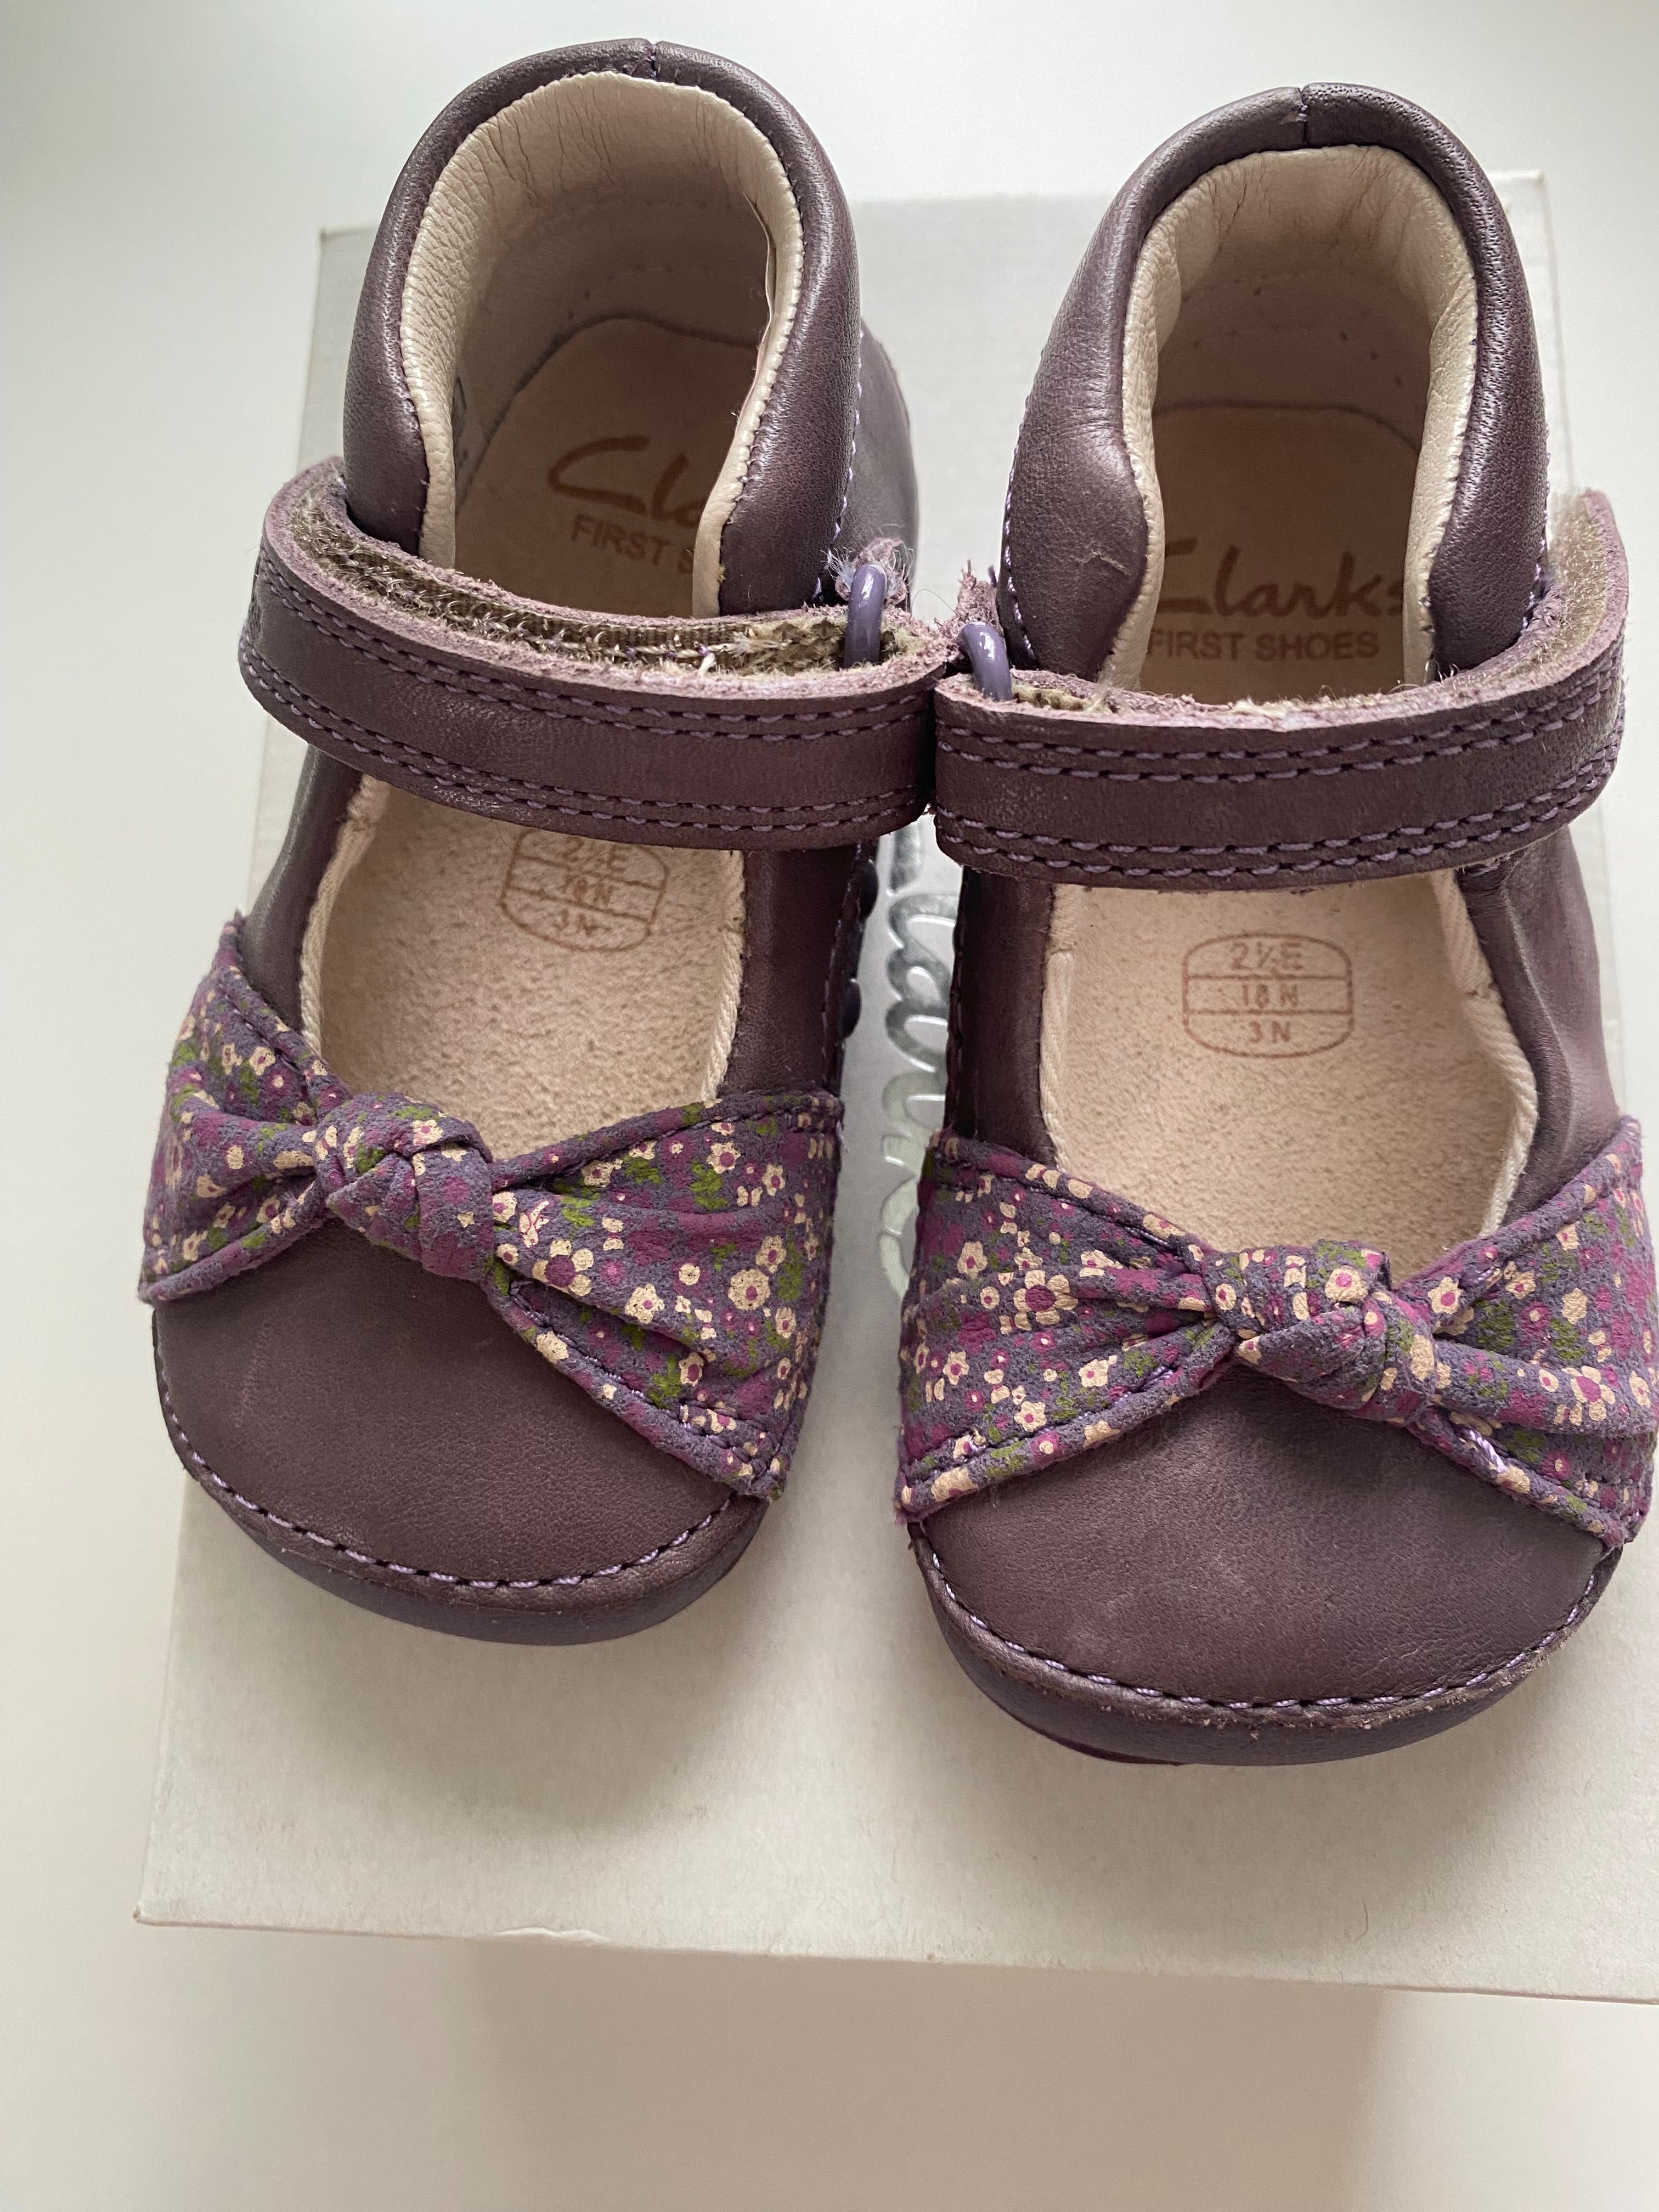 Buty Clarks First shoes 18